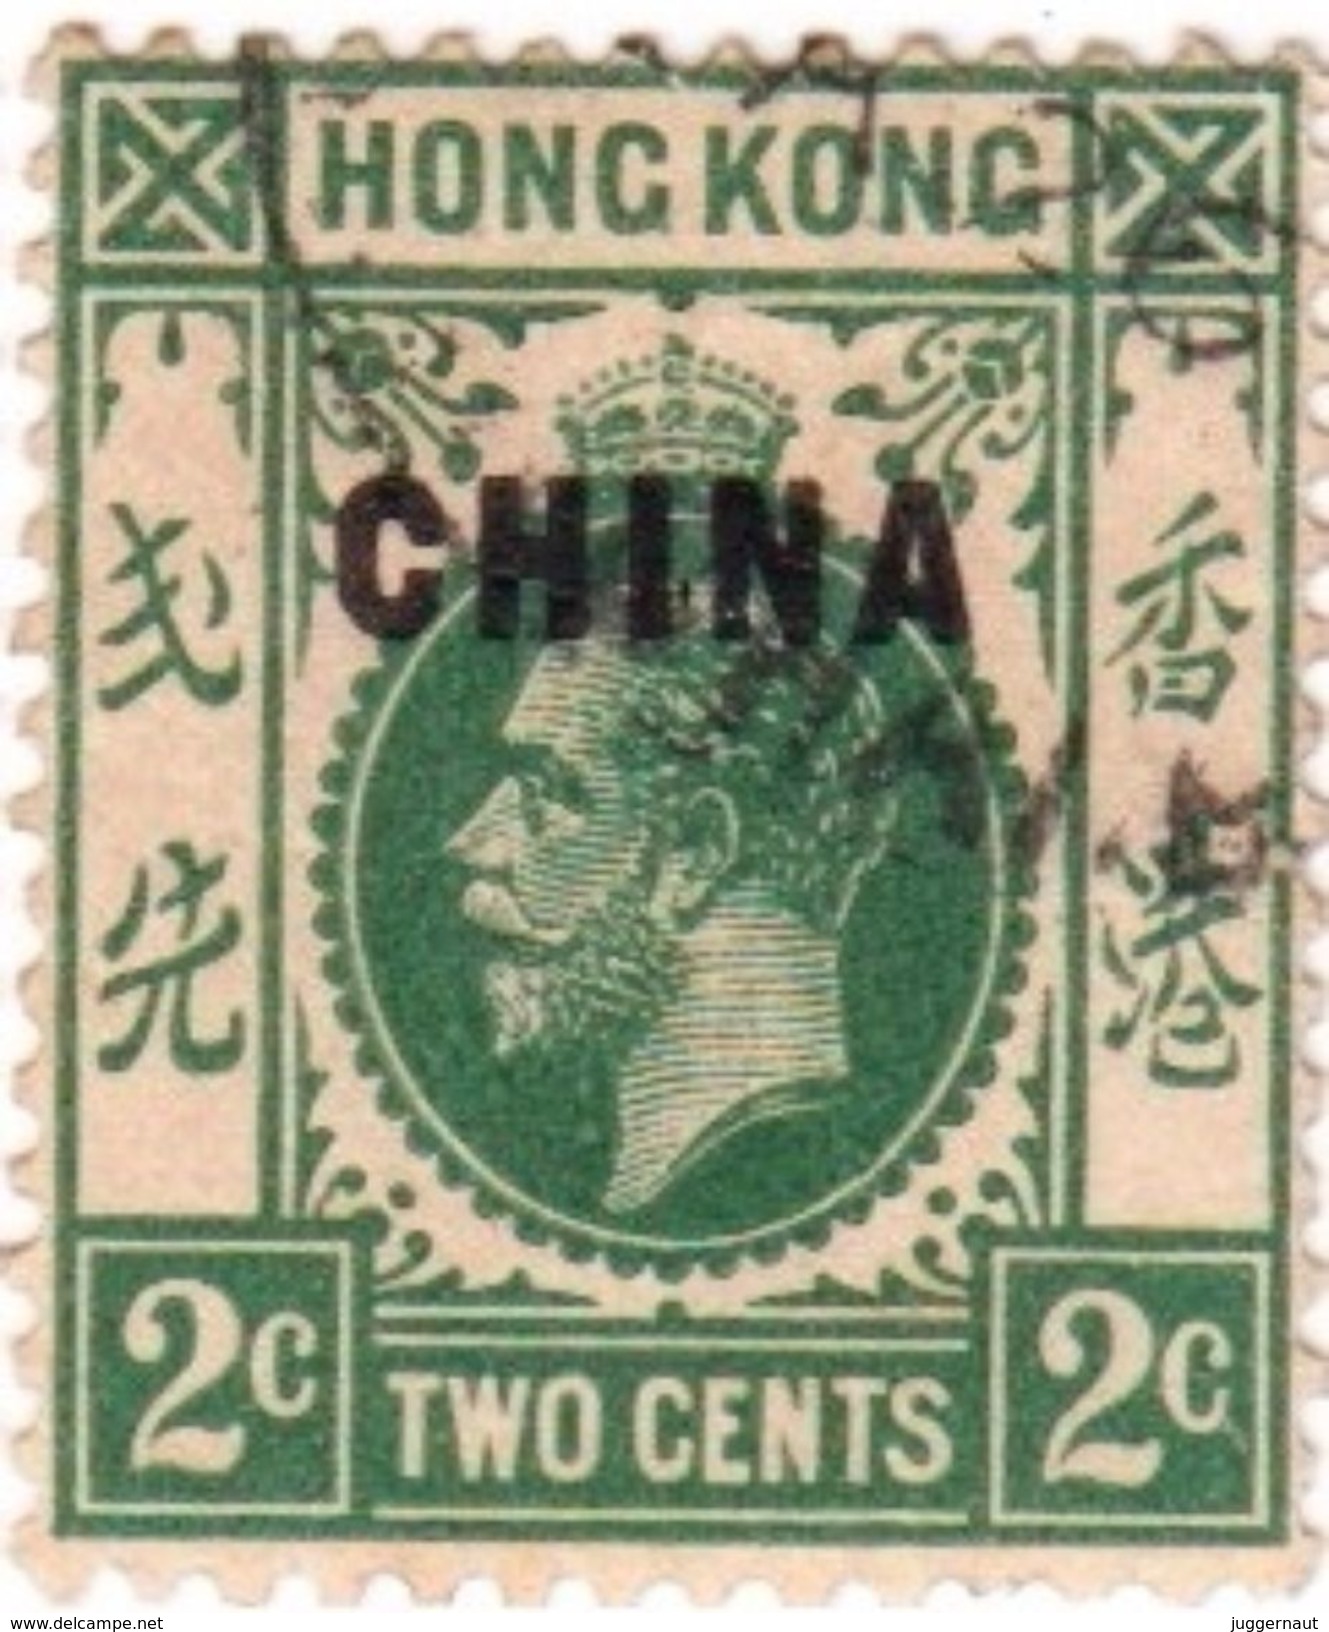 BRITISH HONG KONG CHINA OVERPRINT 2-CENTS POSTAGE STAMP 1917 USED/GOOD - Used Stamps